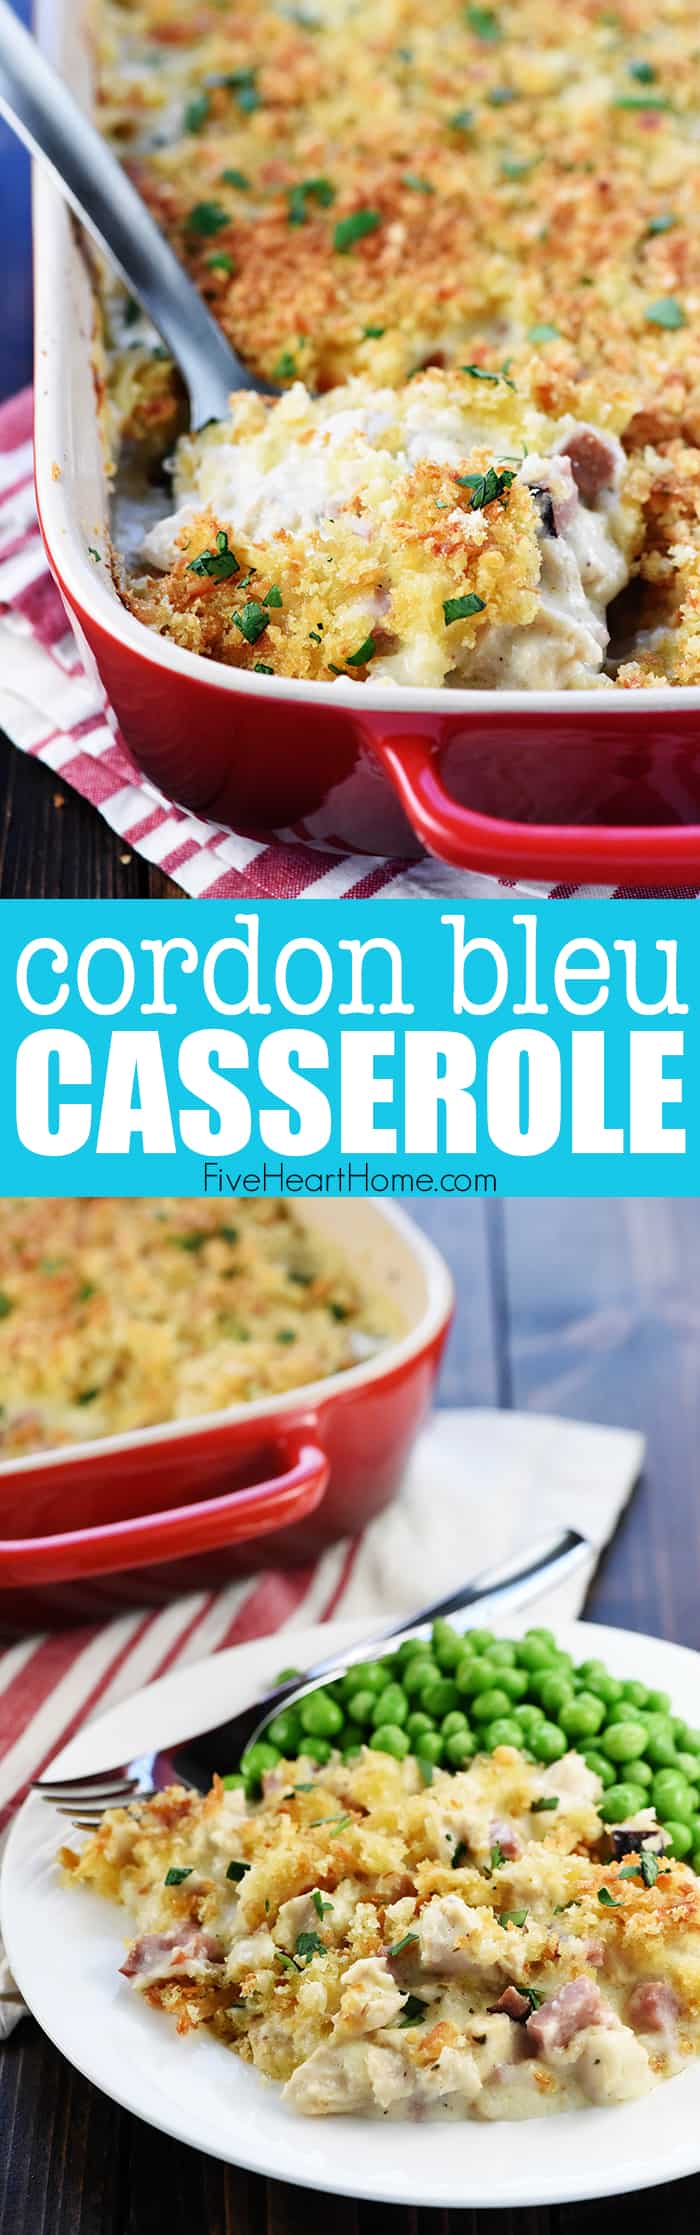 Cordon Bleu Casserole ~ loaded with chicken (or turkey) and ham in a creamy Swiss cheese sauce topped with a layer of toasty bread crumbs for a decadent, delicious dinner...perfect for using up Thanksgiving leftovers! | FiveHeartHome.com via @fivehearthome